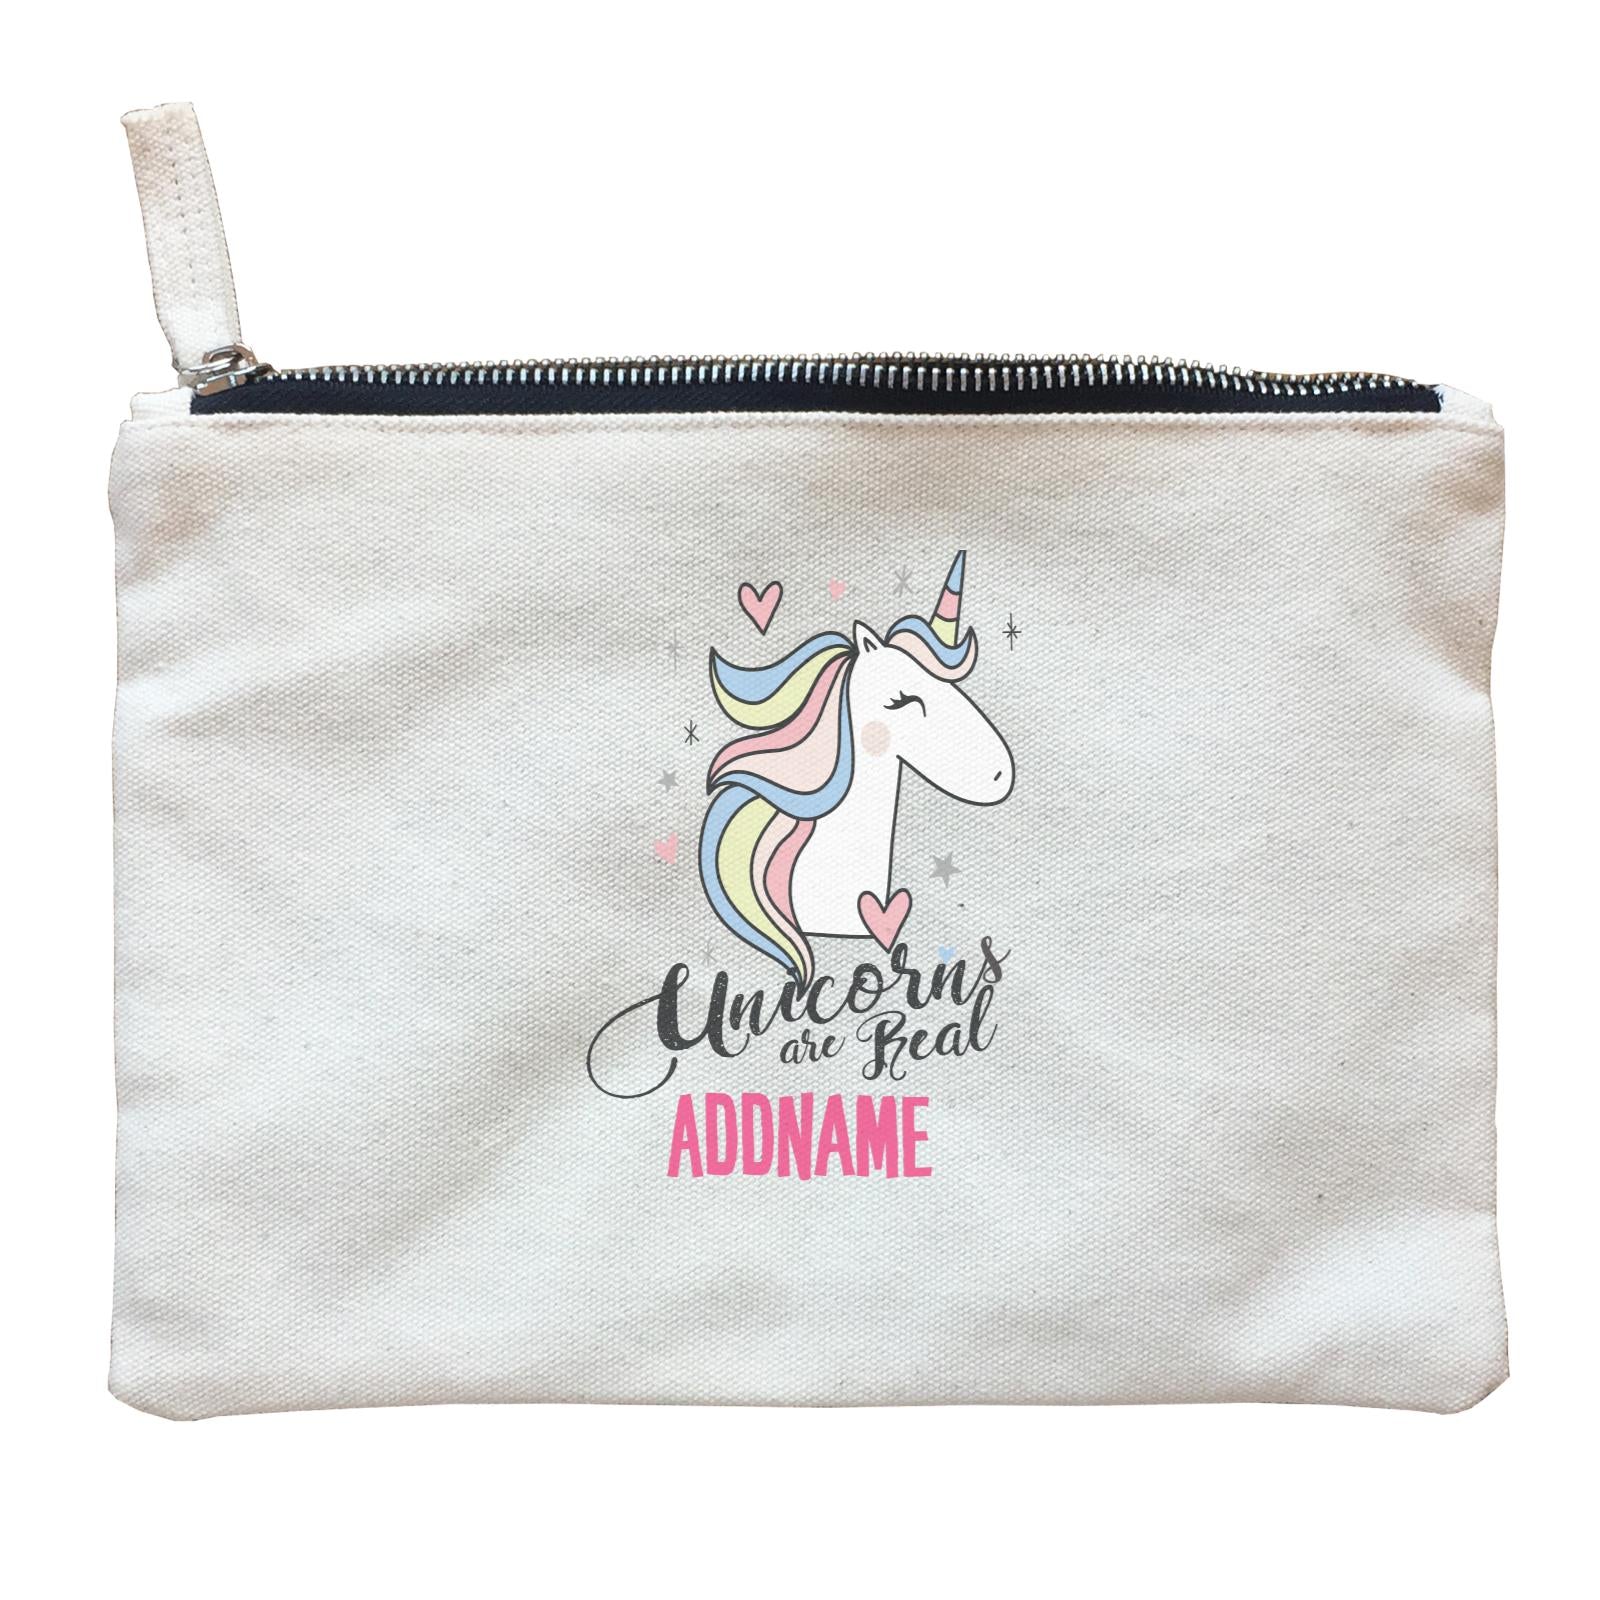 Cool Vibrant Series Unicorns Are Real Addname Zipper Pouch